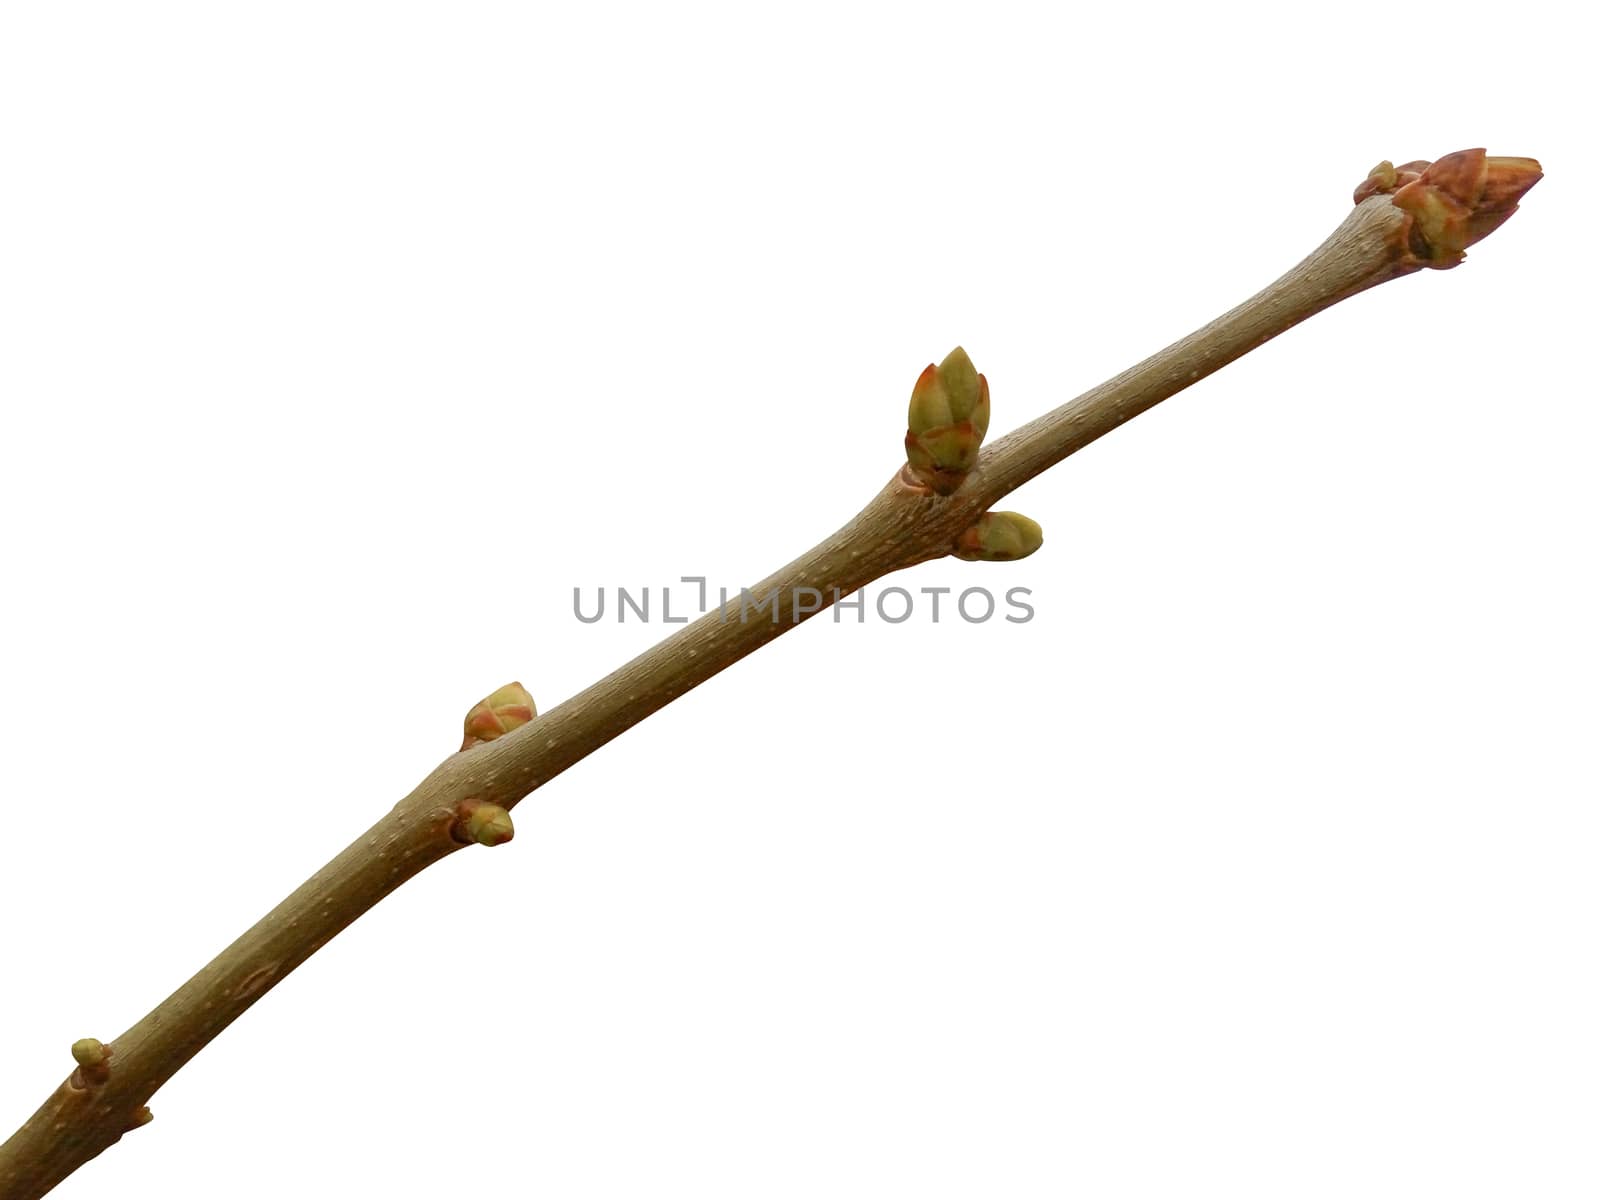 Branch with swollen buds isolated on white with clipping path